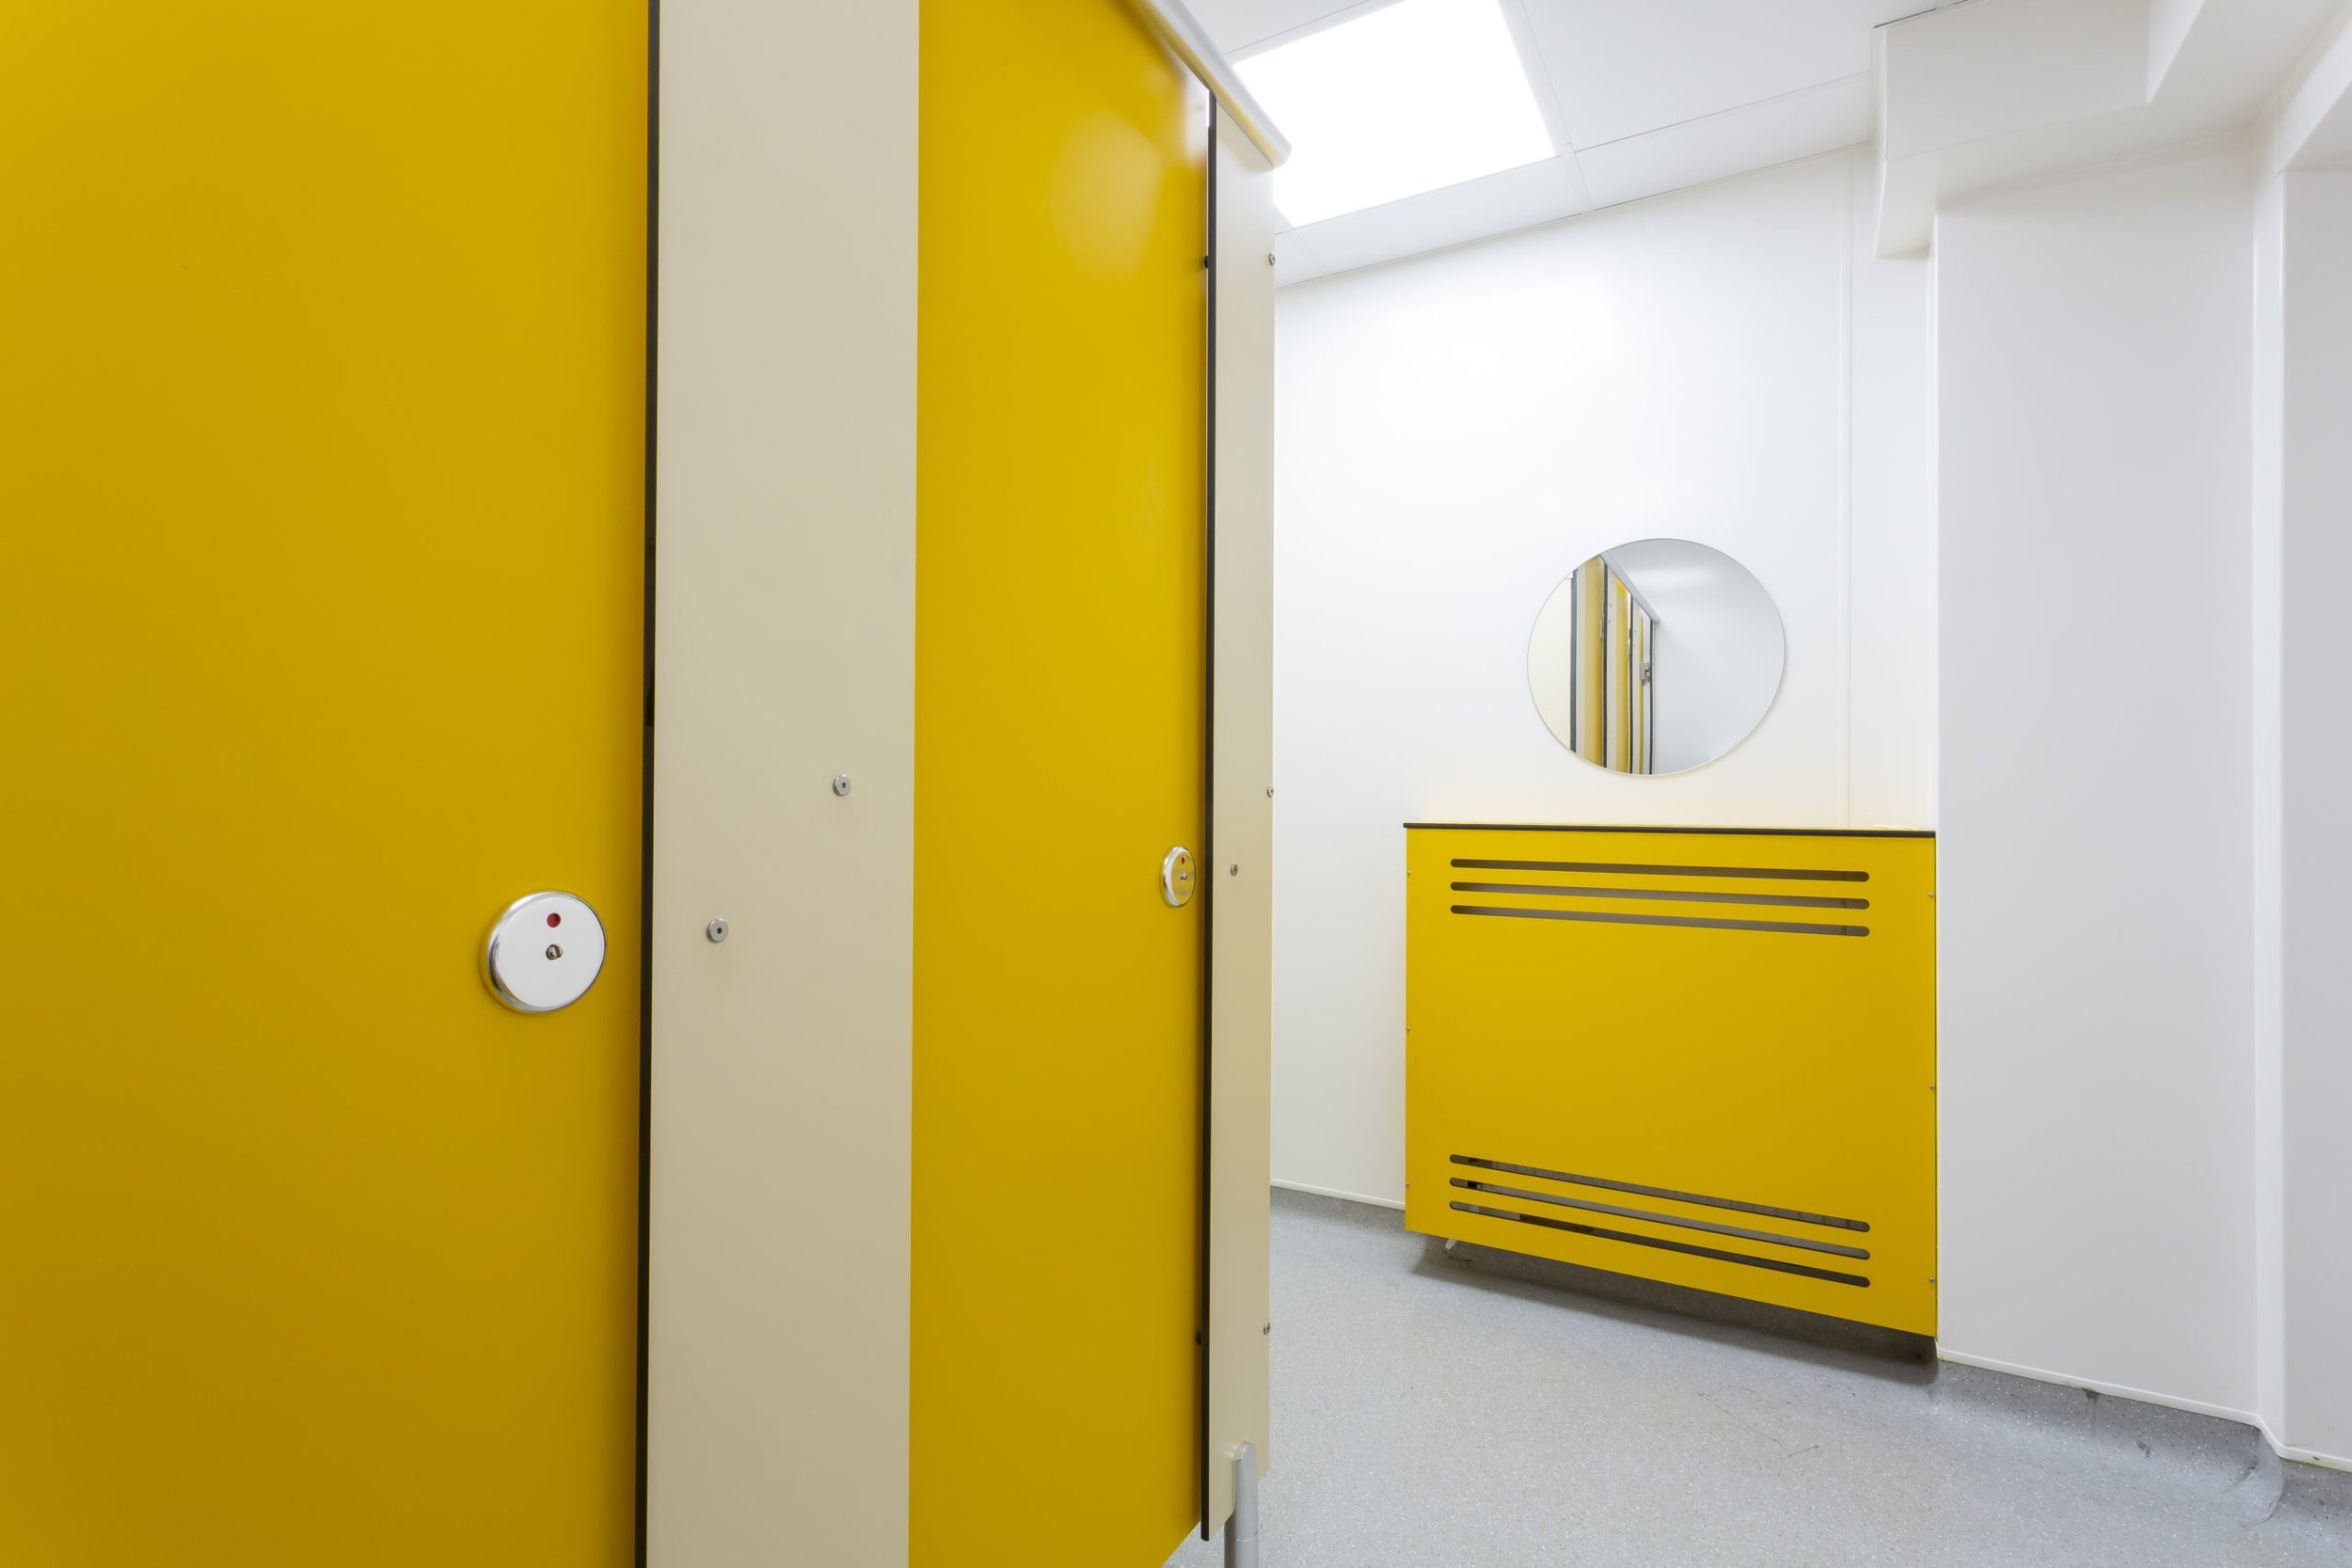 yellow and white toilet cubicles and a radiator cover at cliff park school.jpg